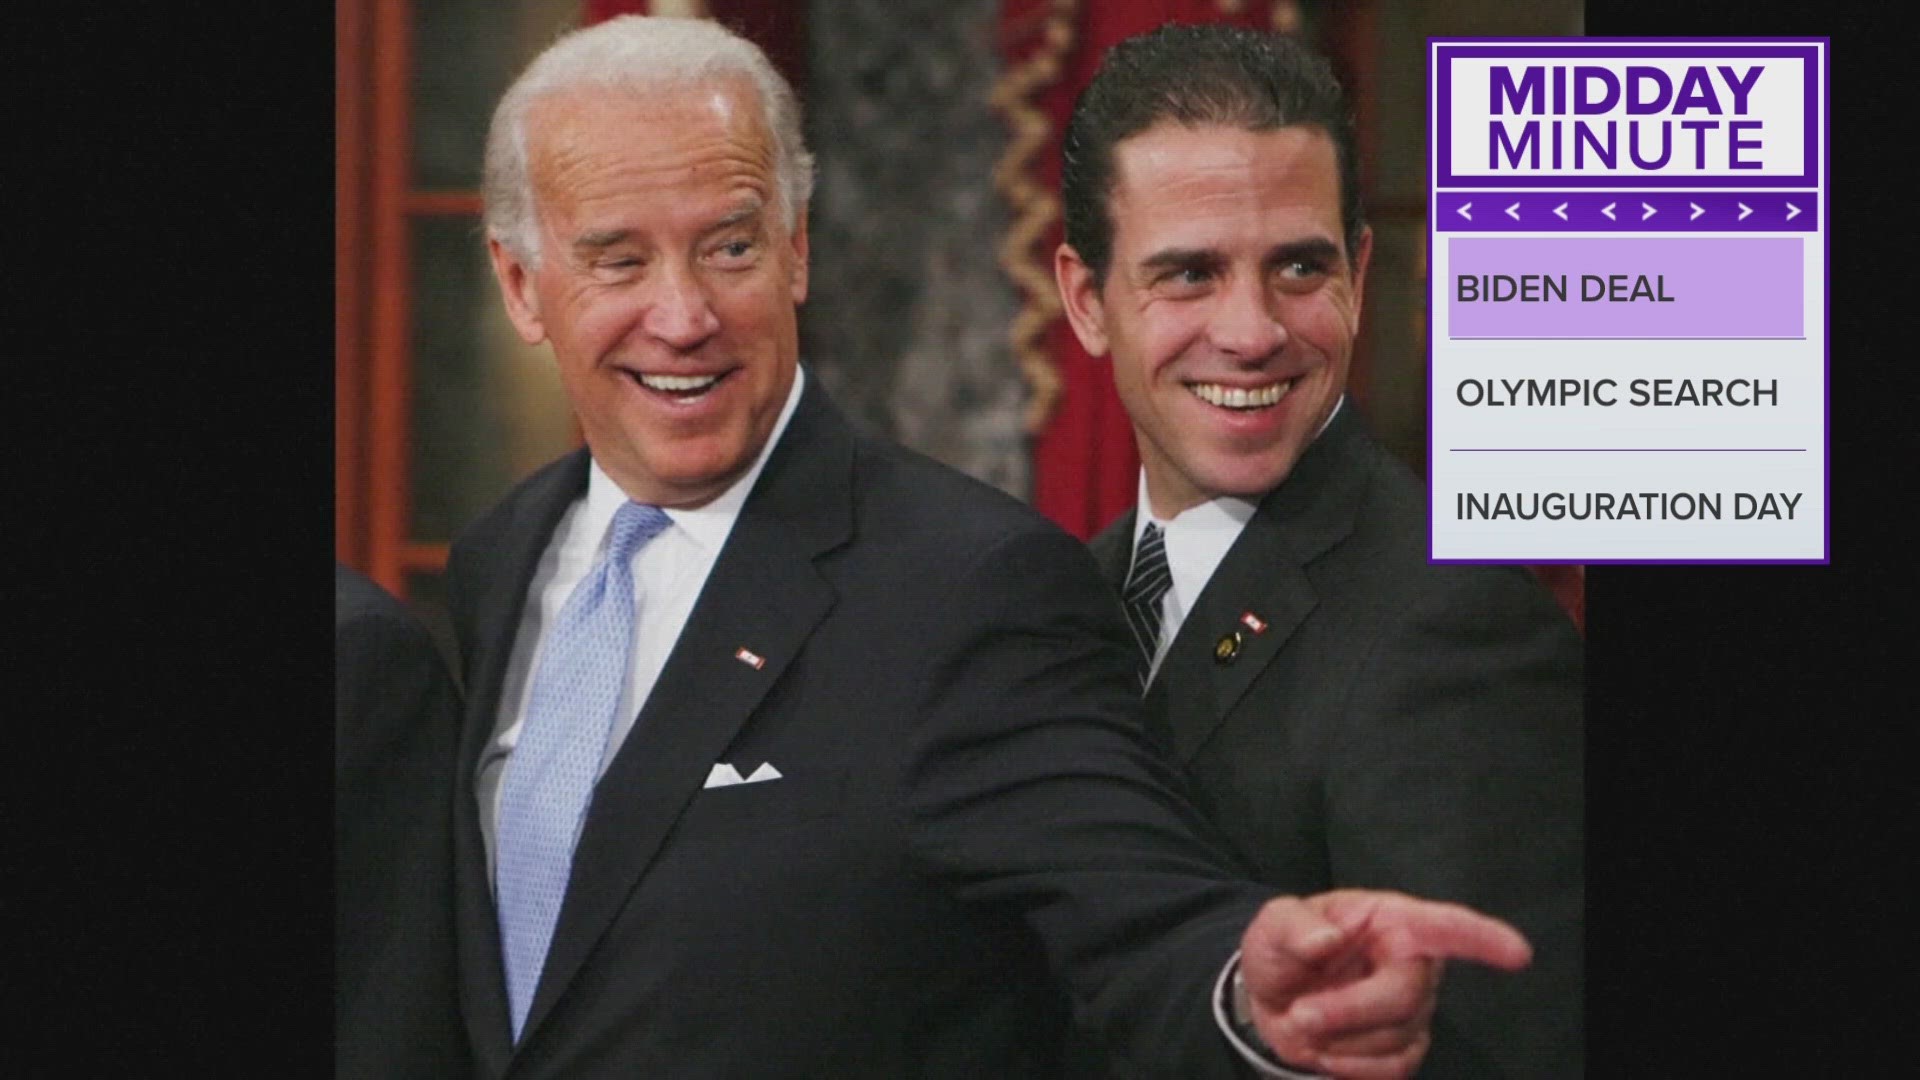 The news comes as congressional Republicans pursue their own investigations into nearly every facet of Hunter Biden's business dealings.